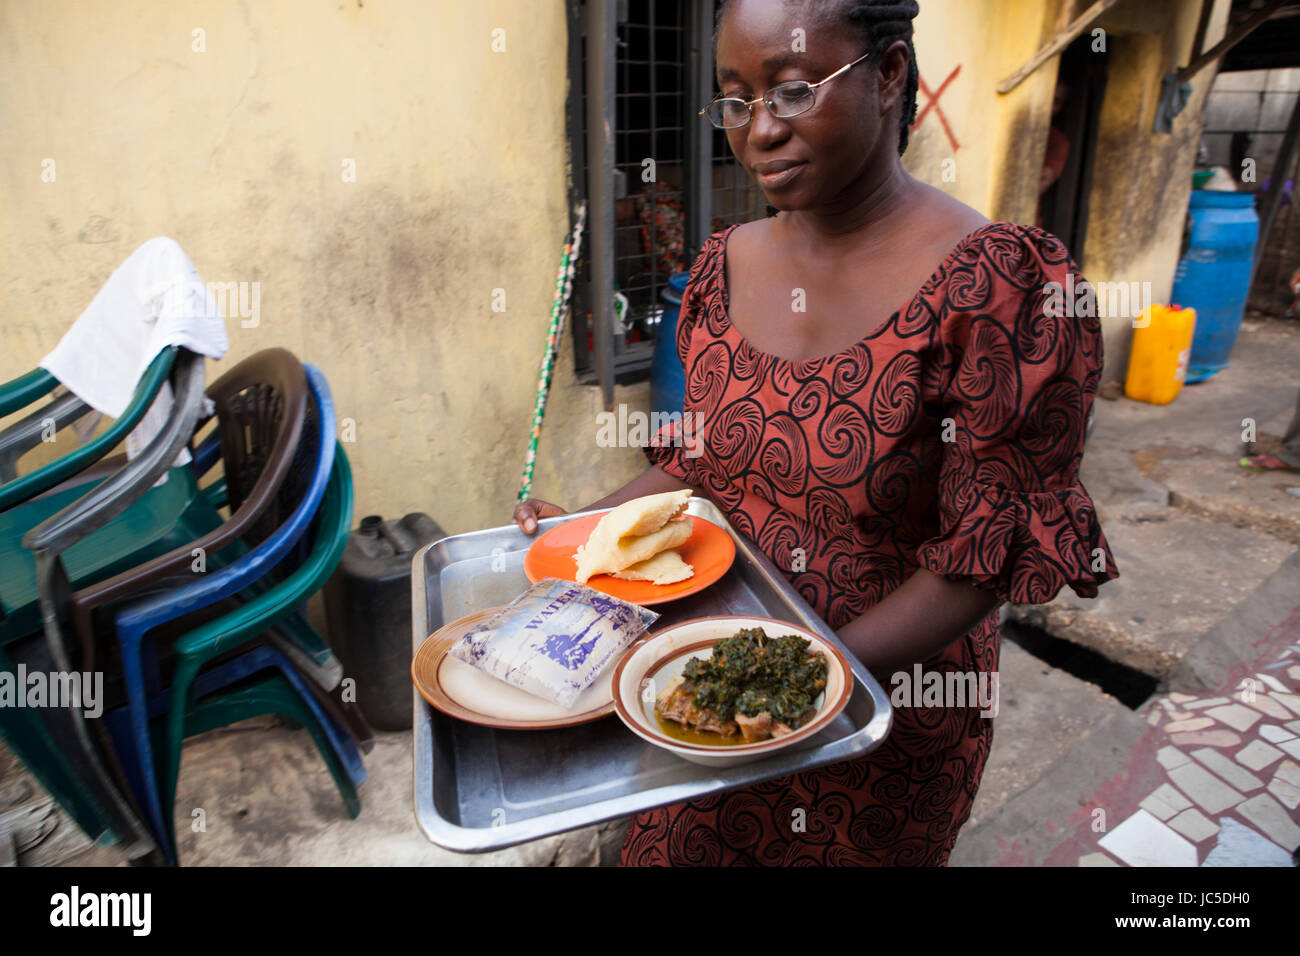 A woman carrying a tray of food and water, Nigeria, Africa Stock Photo